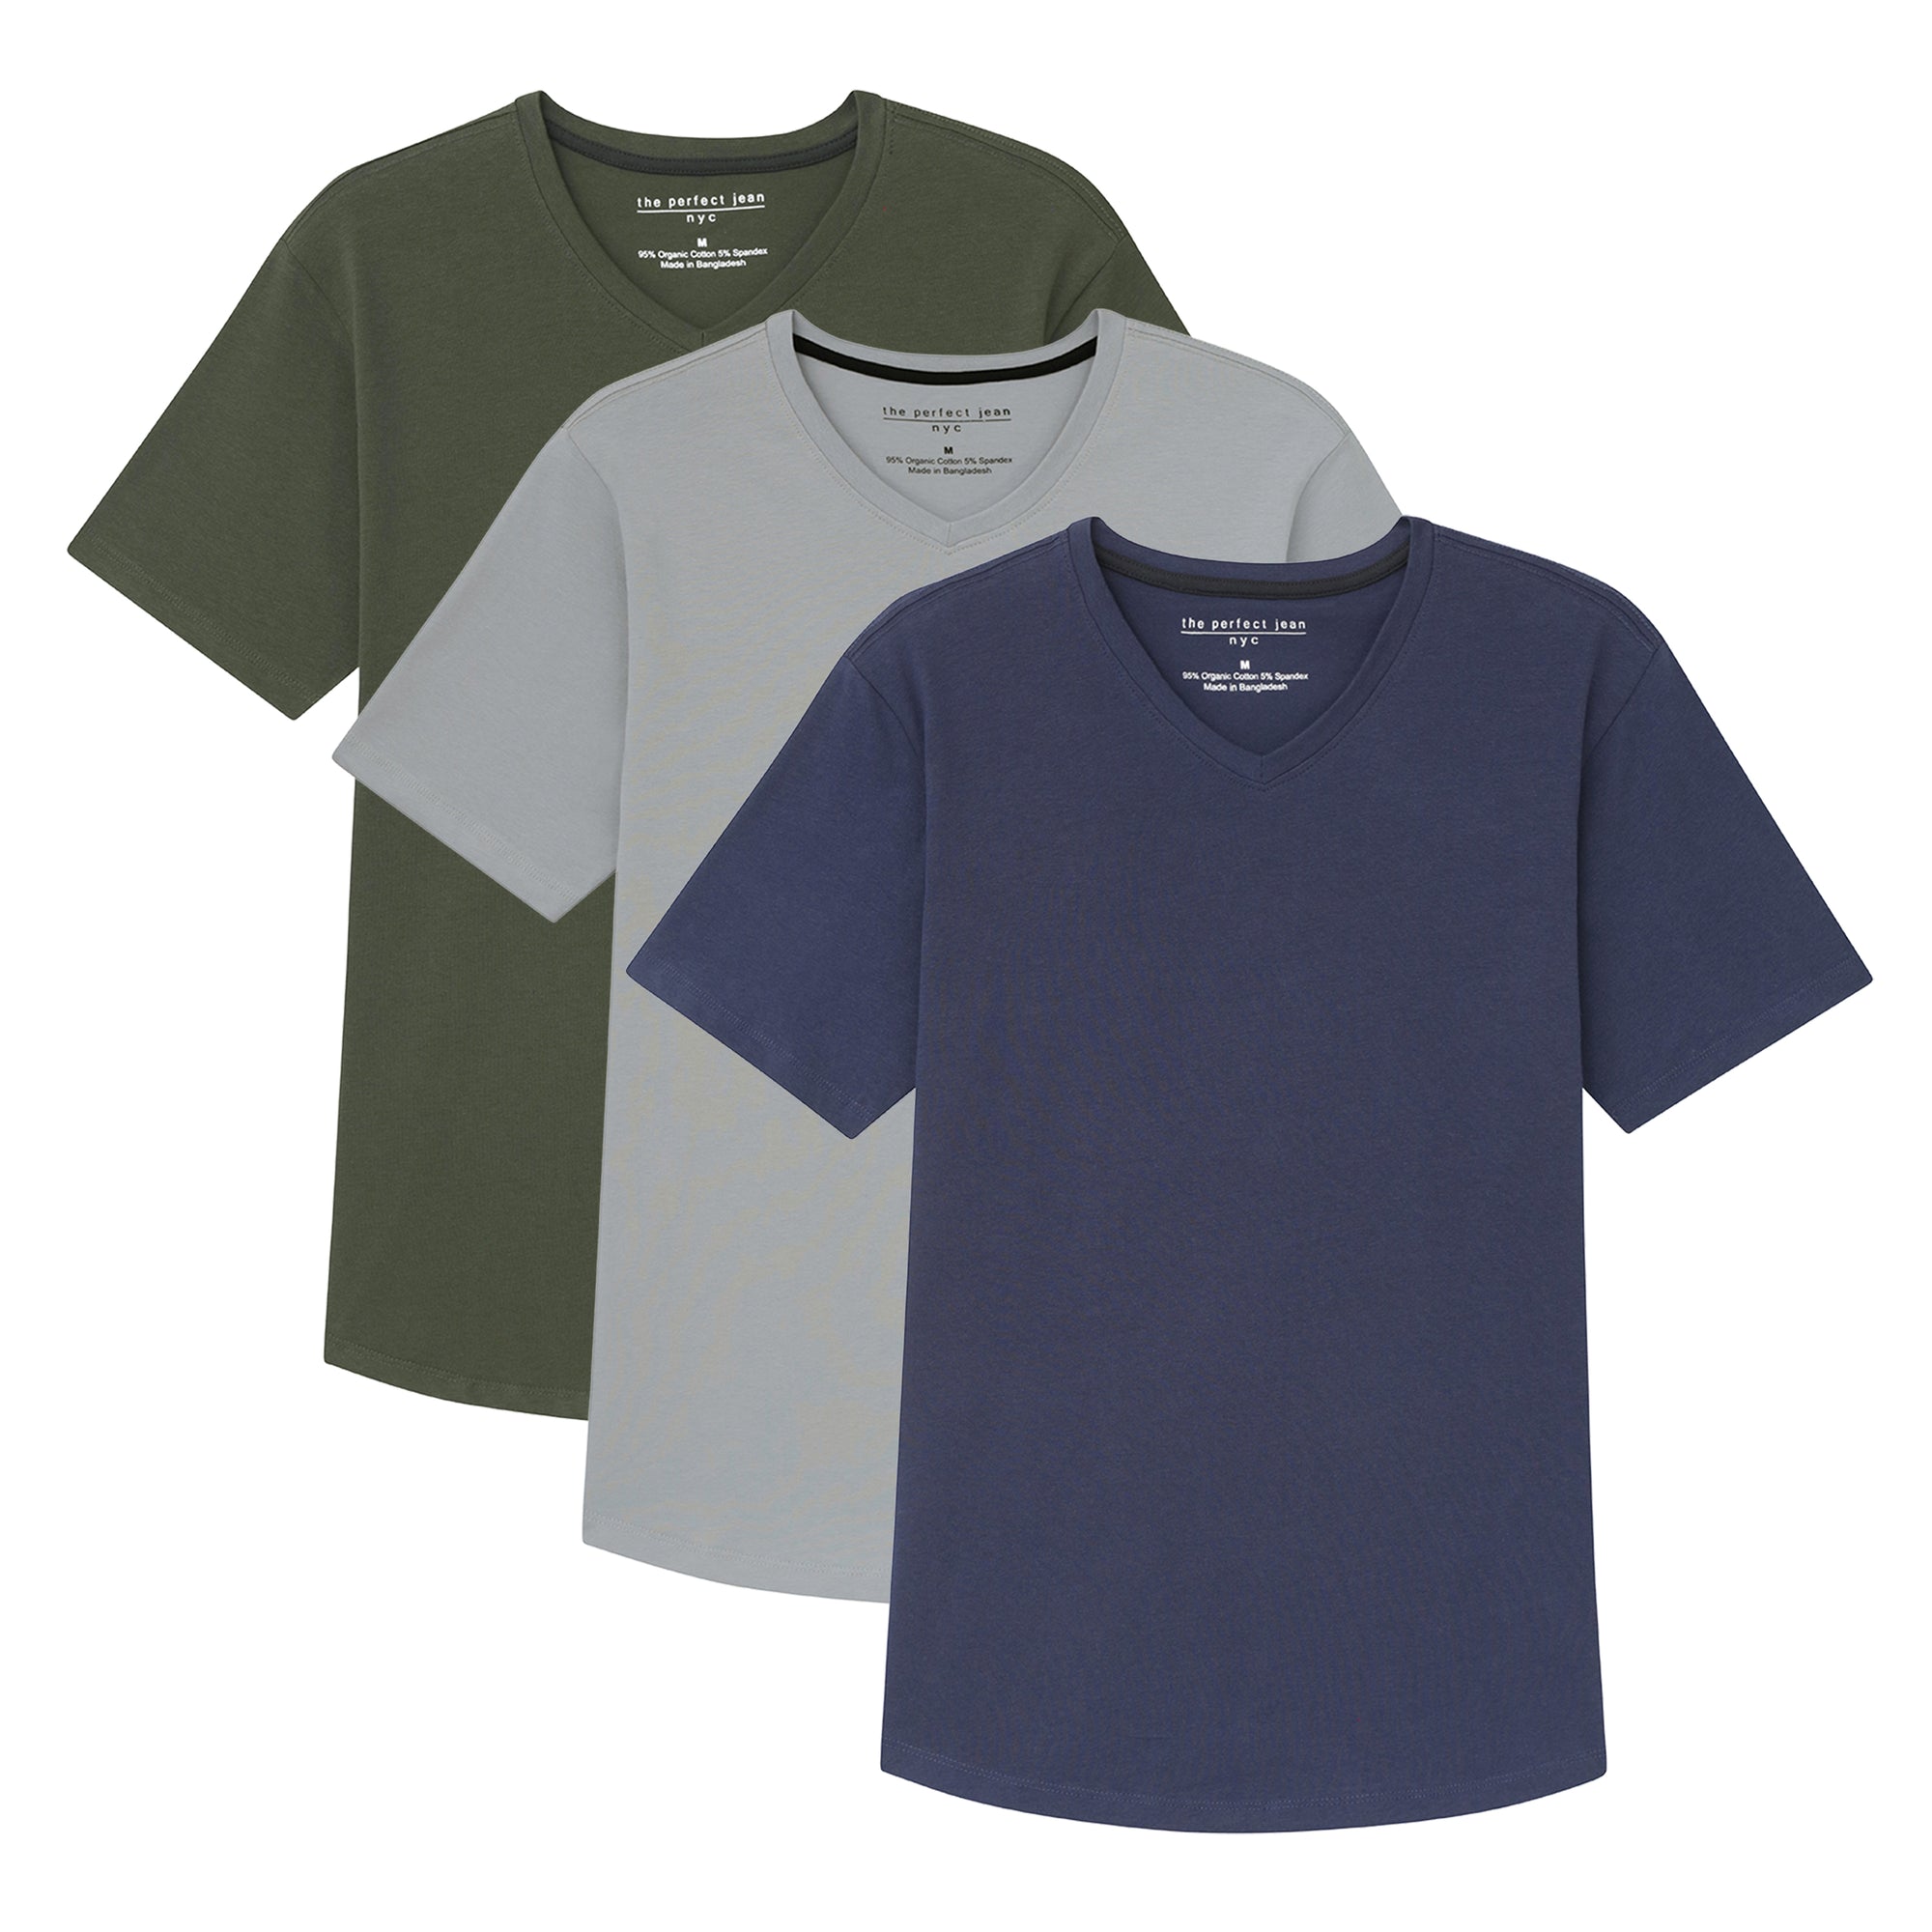 Pack of 5 Crew-Neck T-shirts